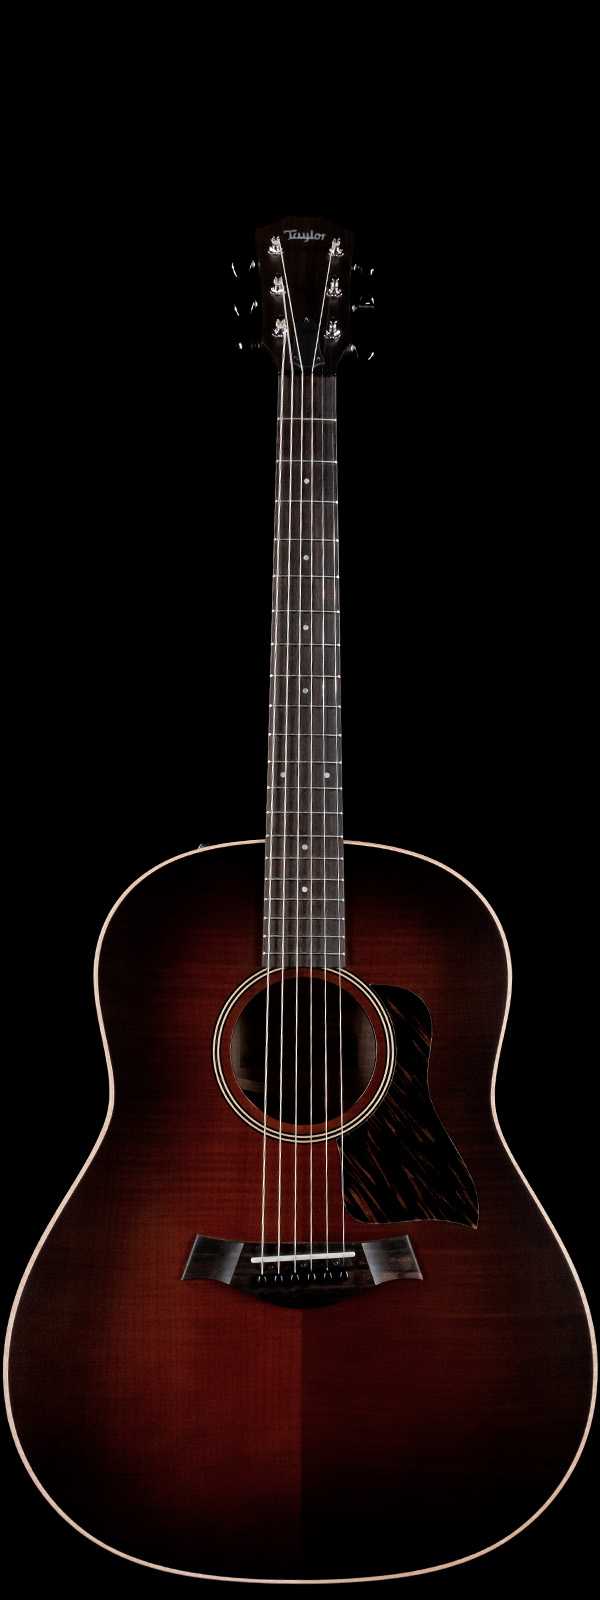 Taylor AD27e American Dream Grand Pacific Flame Top Acoustic Electric Satin Finish